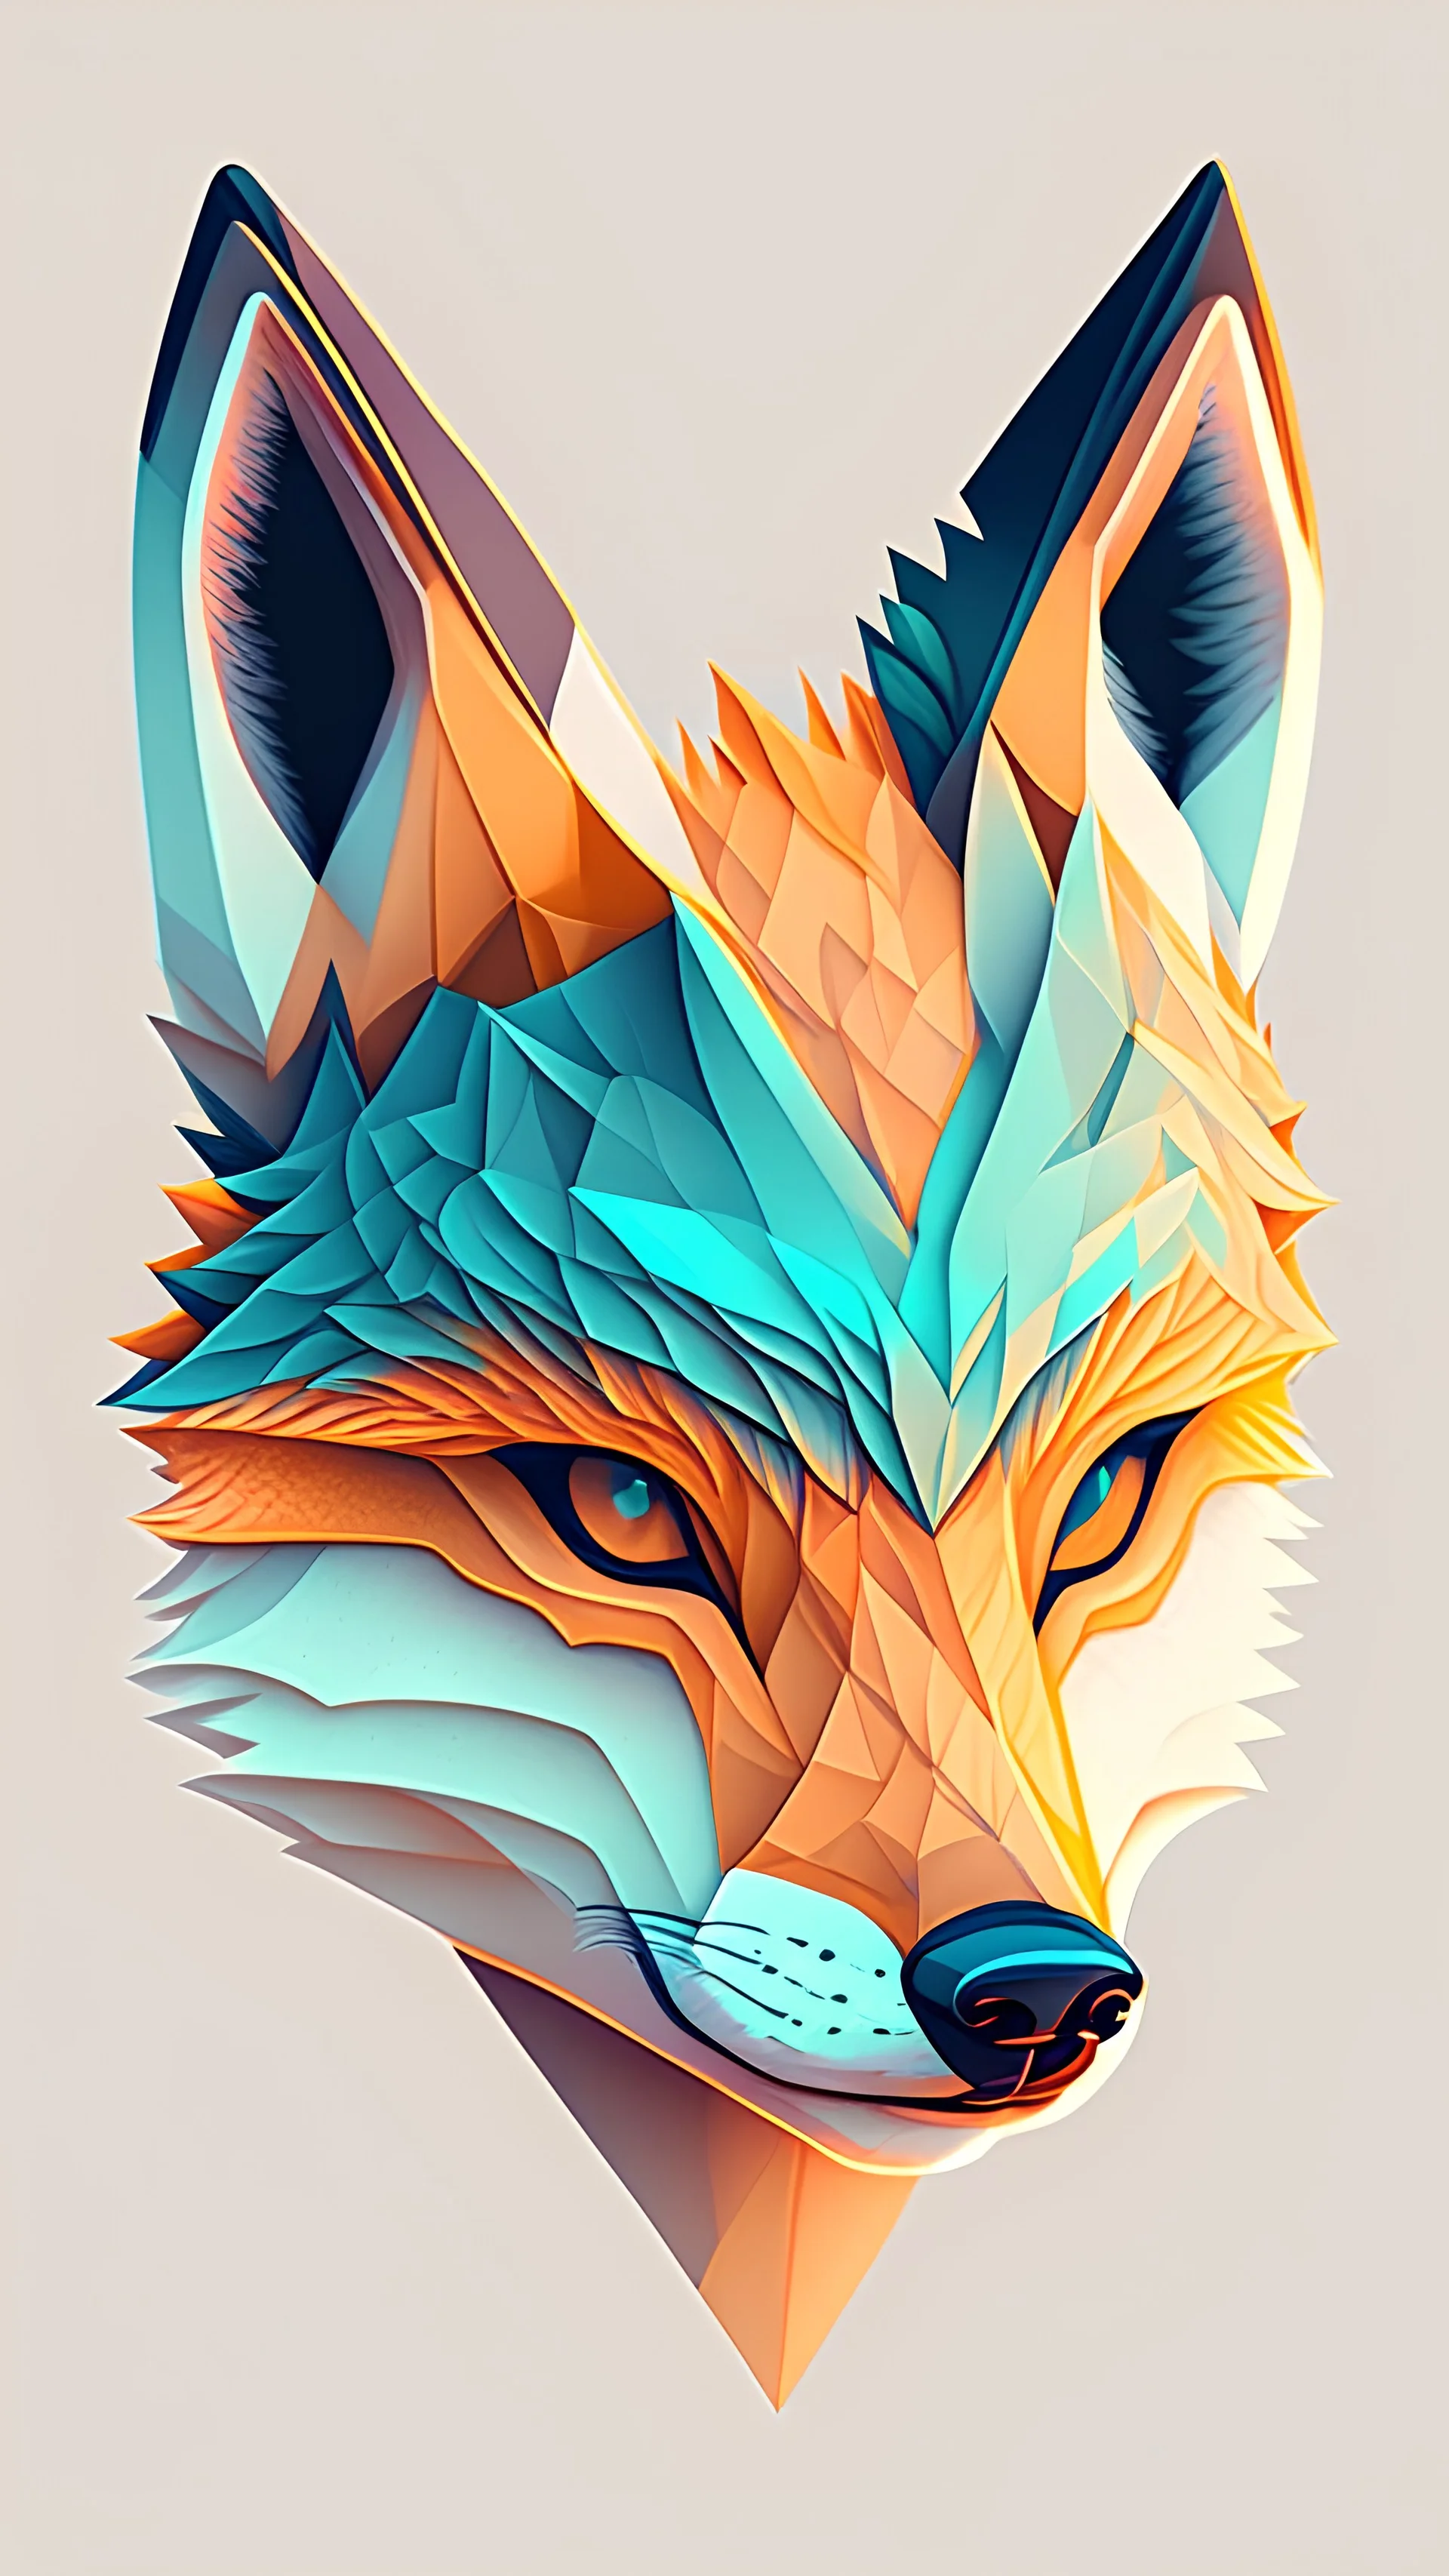 A detailed illustration face ninja wolf, fire, t-shirt design, t-shirt design, in the style of Studio Ghibli, pastel tetradic colors, 3D vector art, cute and quirky, fantasy art, watercolor effect, bokeh, Adobe Illustrator, hand-drawn, digital painting, low-poly, soft lighting, bird's-eye view, isometric style, retro aesthetic, focused on the character, 4K resolution, photorealistic rendering, using Cinema 4D, vector logo, vector art, put word "FuriuS", 2d, emblem, 2d, use pasten colors